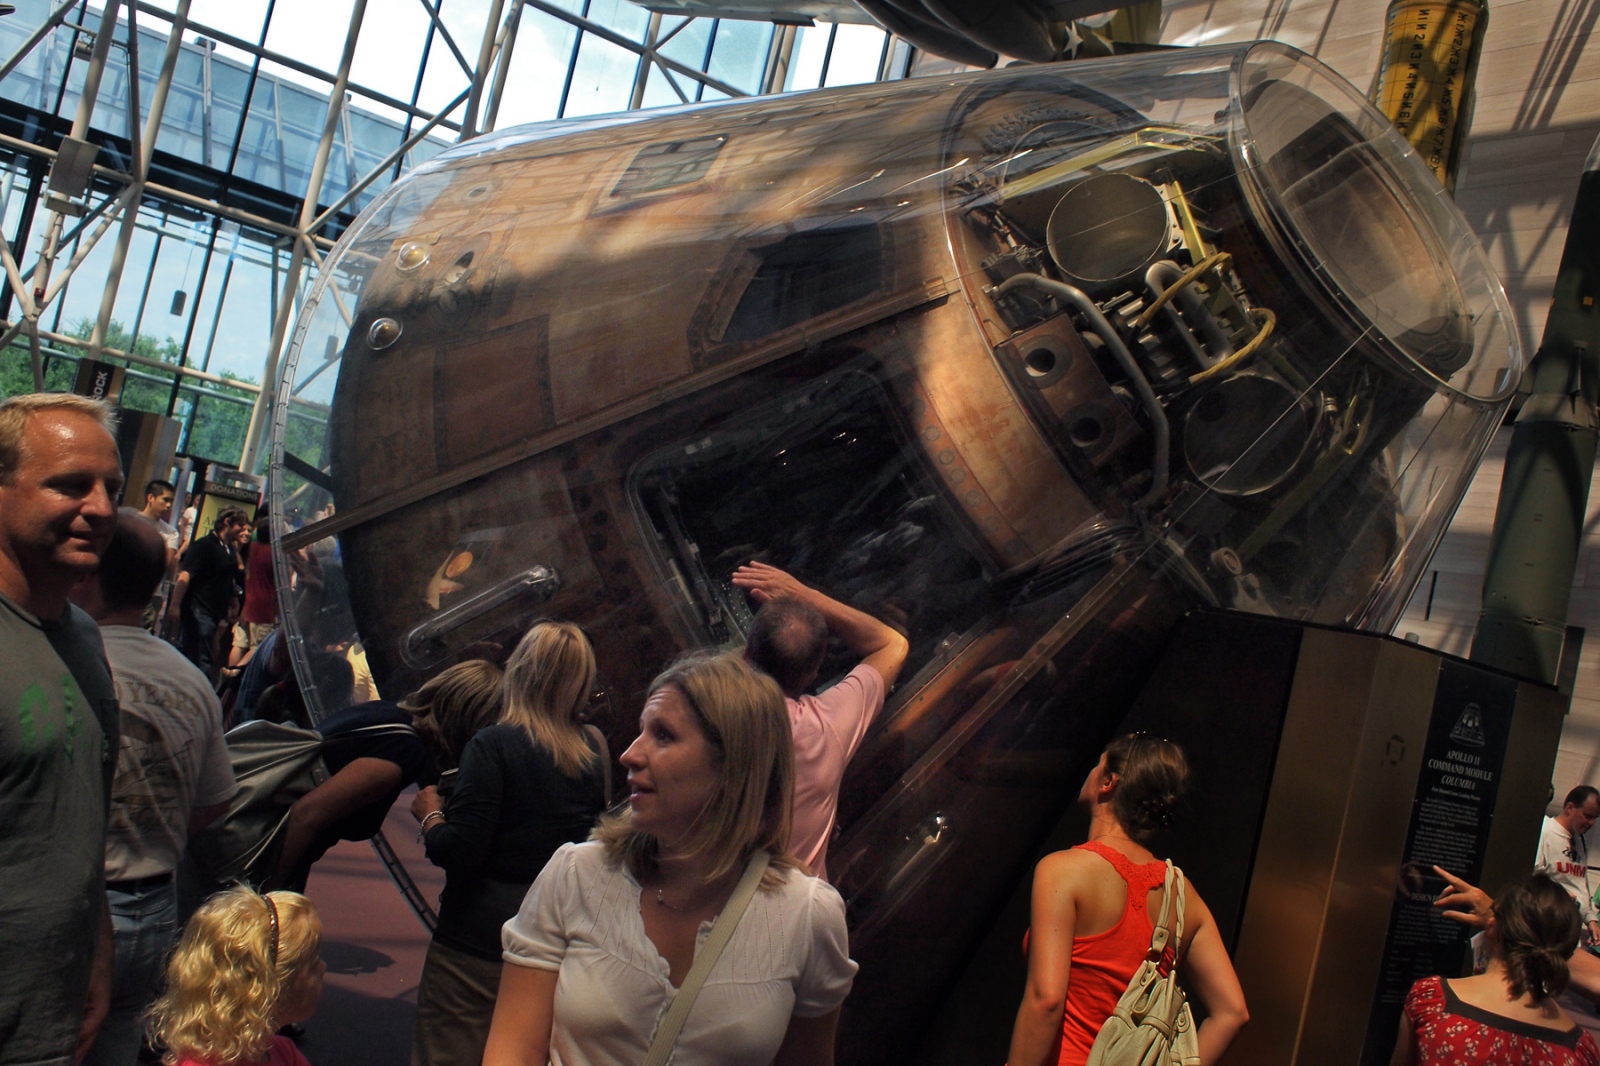  At the National Air and Space Museum in Washington DC, the 40th Anniversary of the Apollo 11 mission that landed the first humans on the moon has...